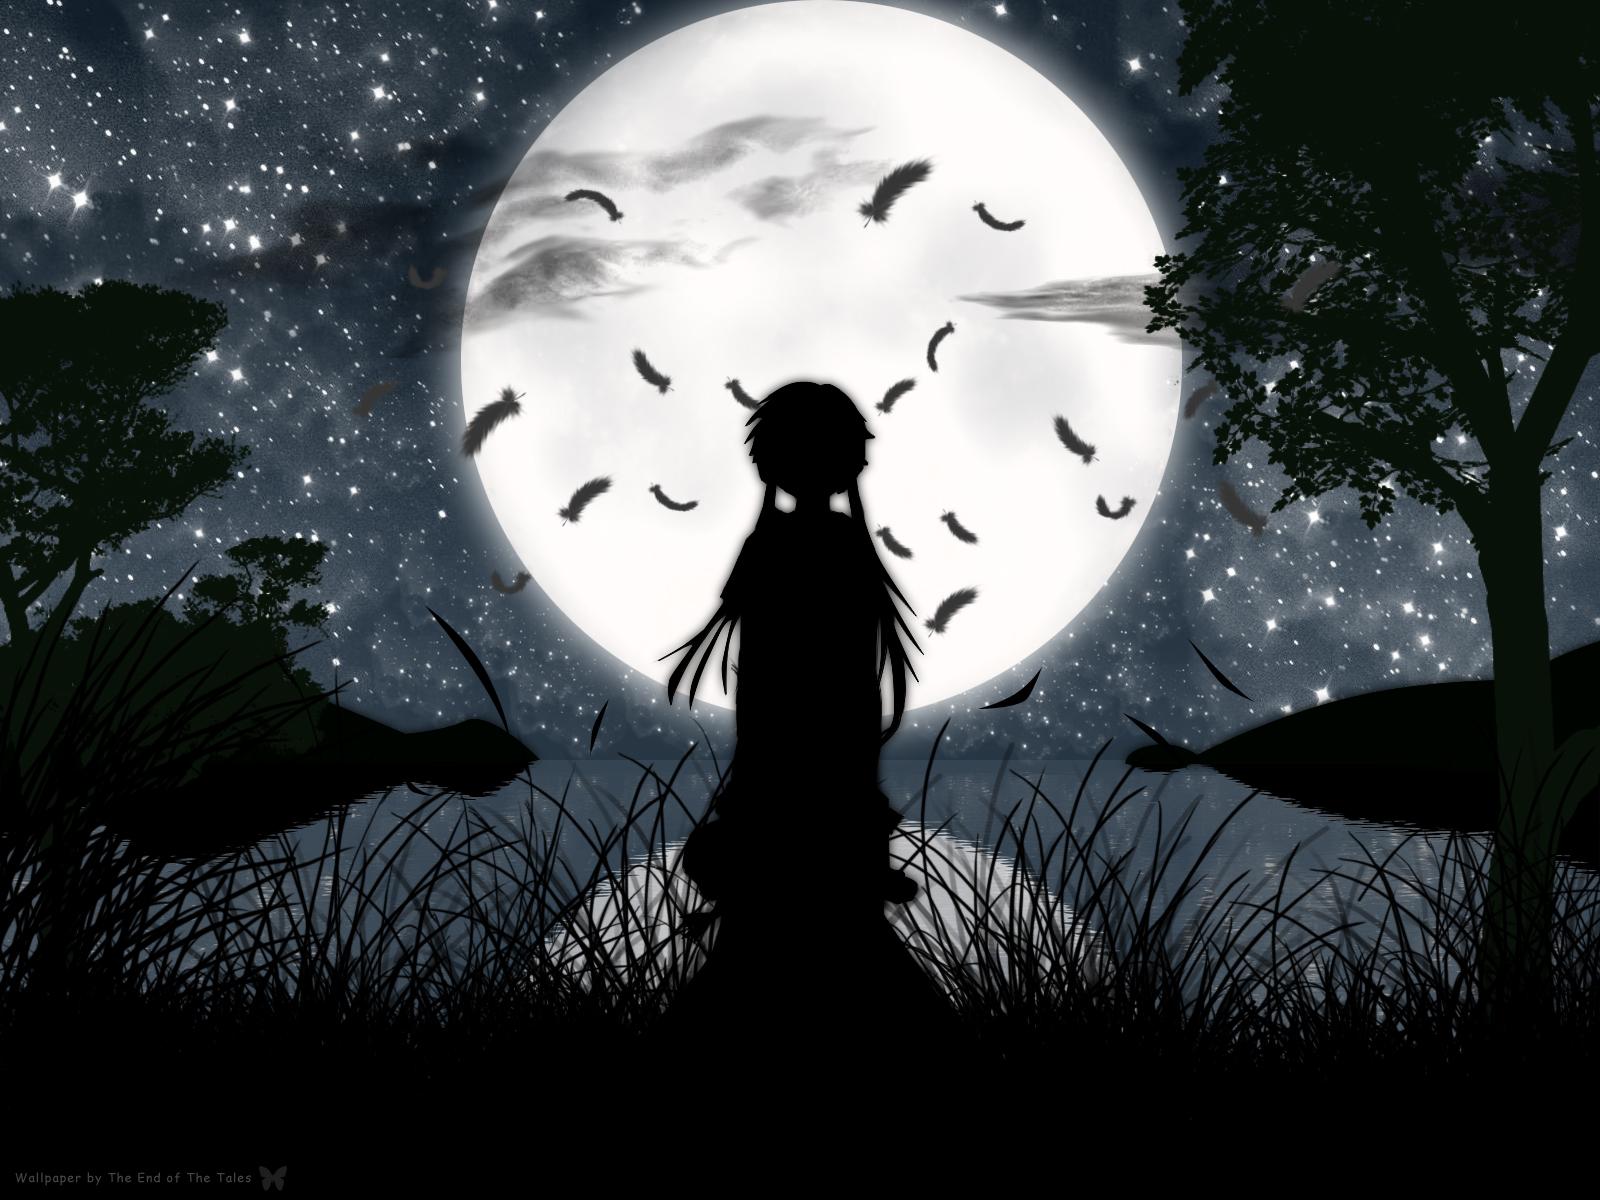 Night Sky Anime Wallpaper Stock Photo, Picture and Royalty Free Image.  Image 206808817.